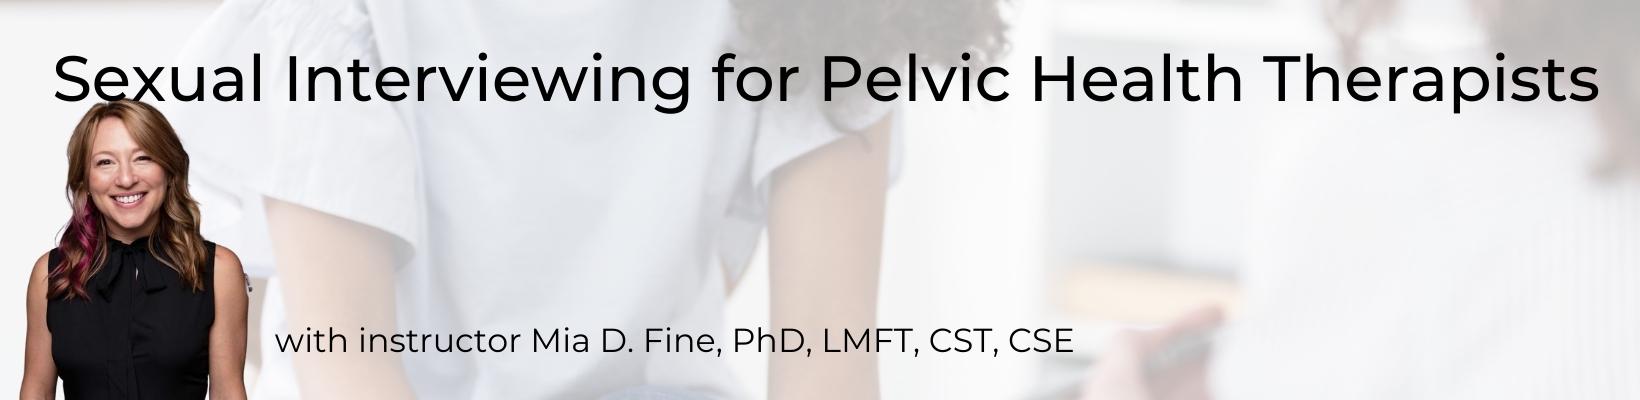 Dr. Mia Fine Teaches Sexual Interviewing for Pelvic Health Therapists